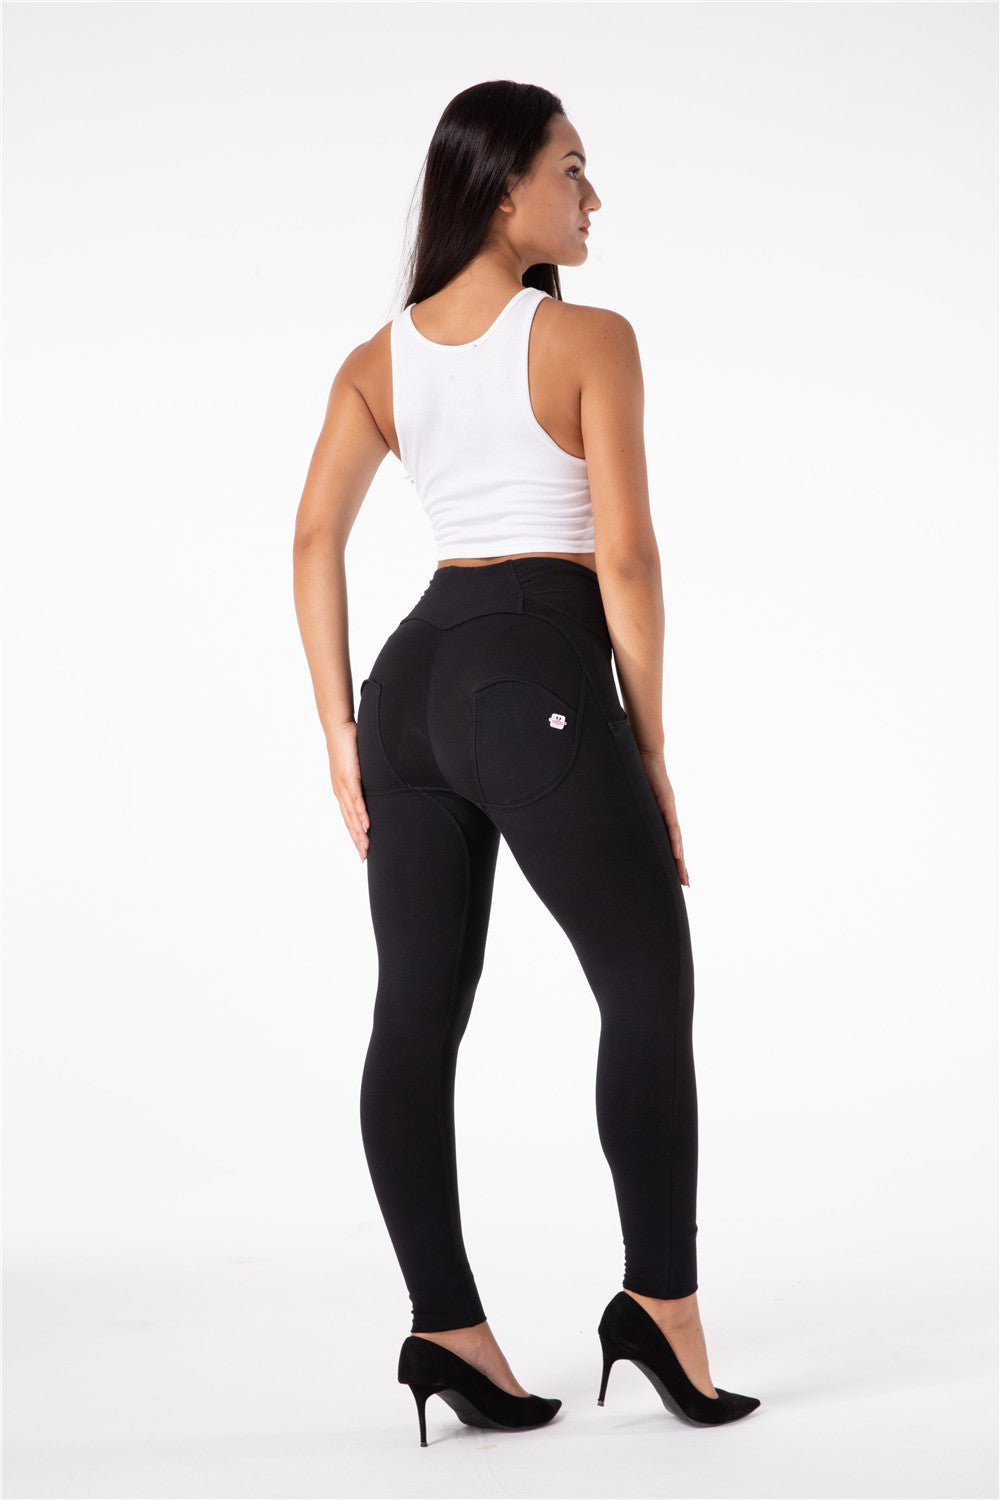 Black High Waist Melody Shaping Leggings – Melody South Africa